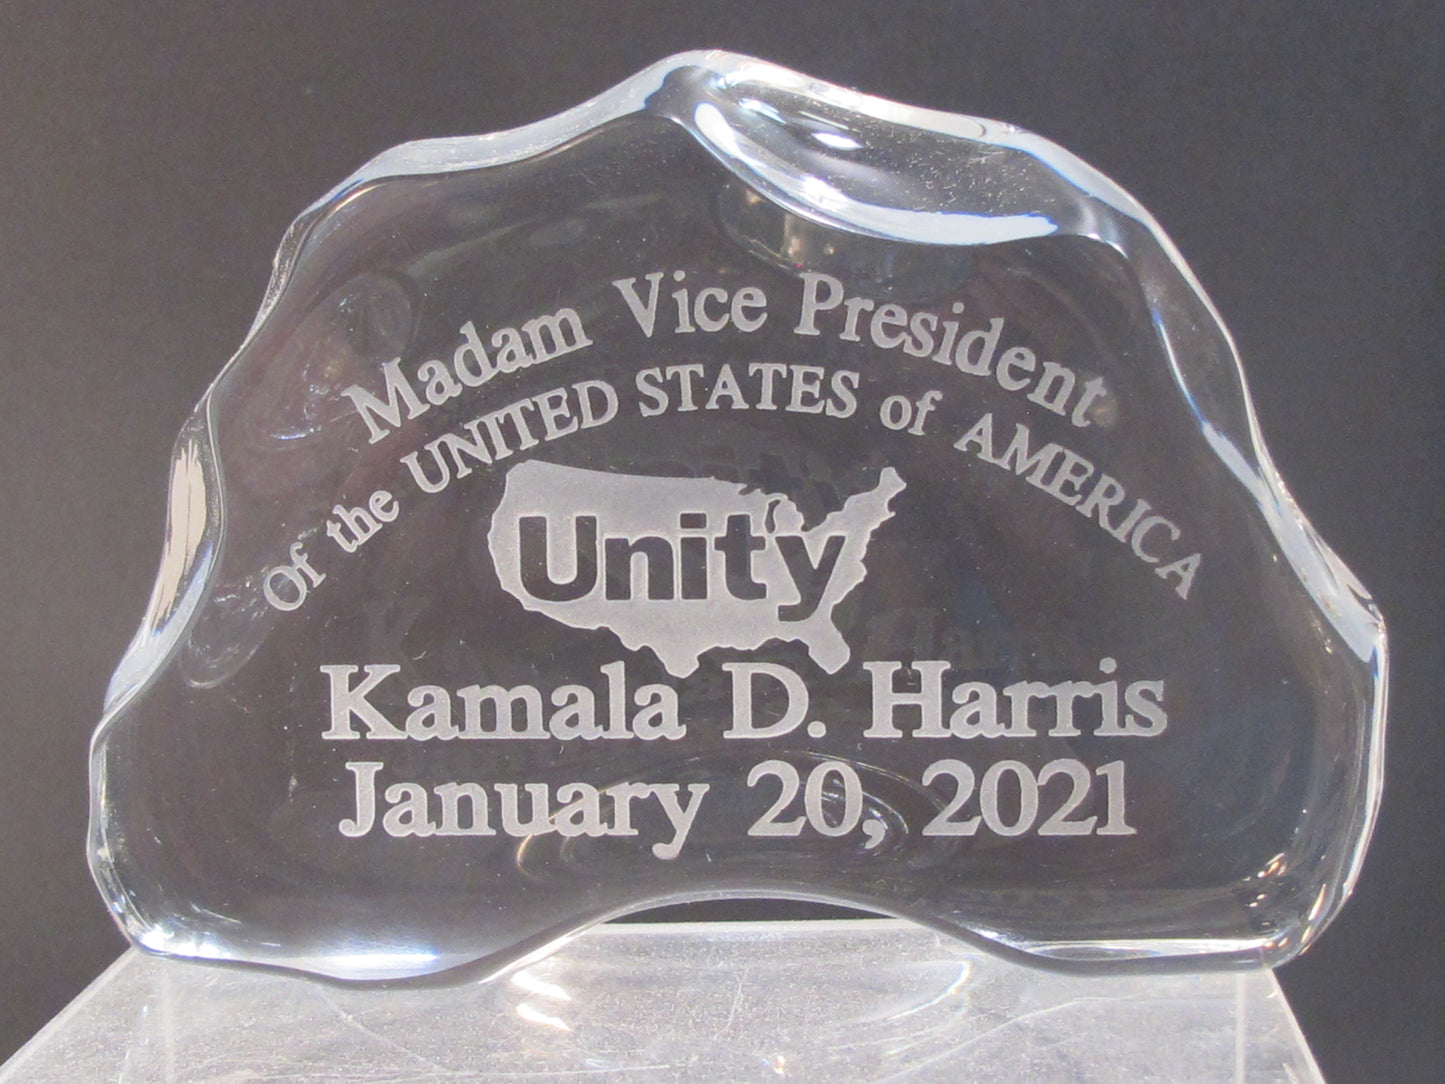 Madam Vice President Harris Unity CRYSTAL PAPERWEIGHT made in USA